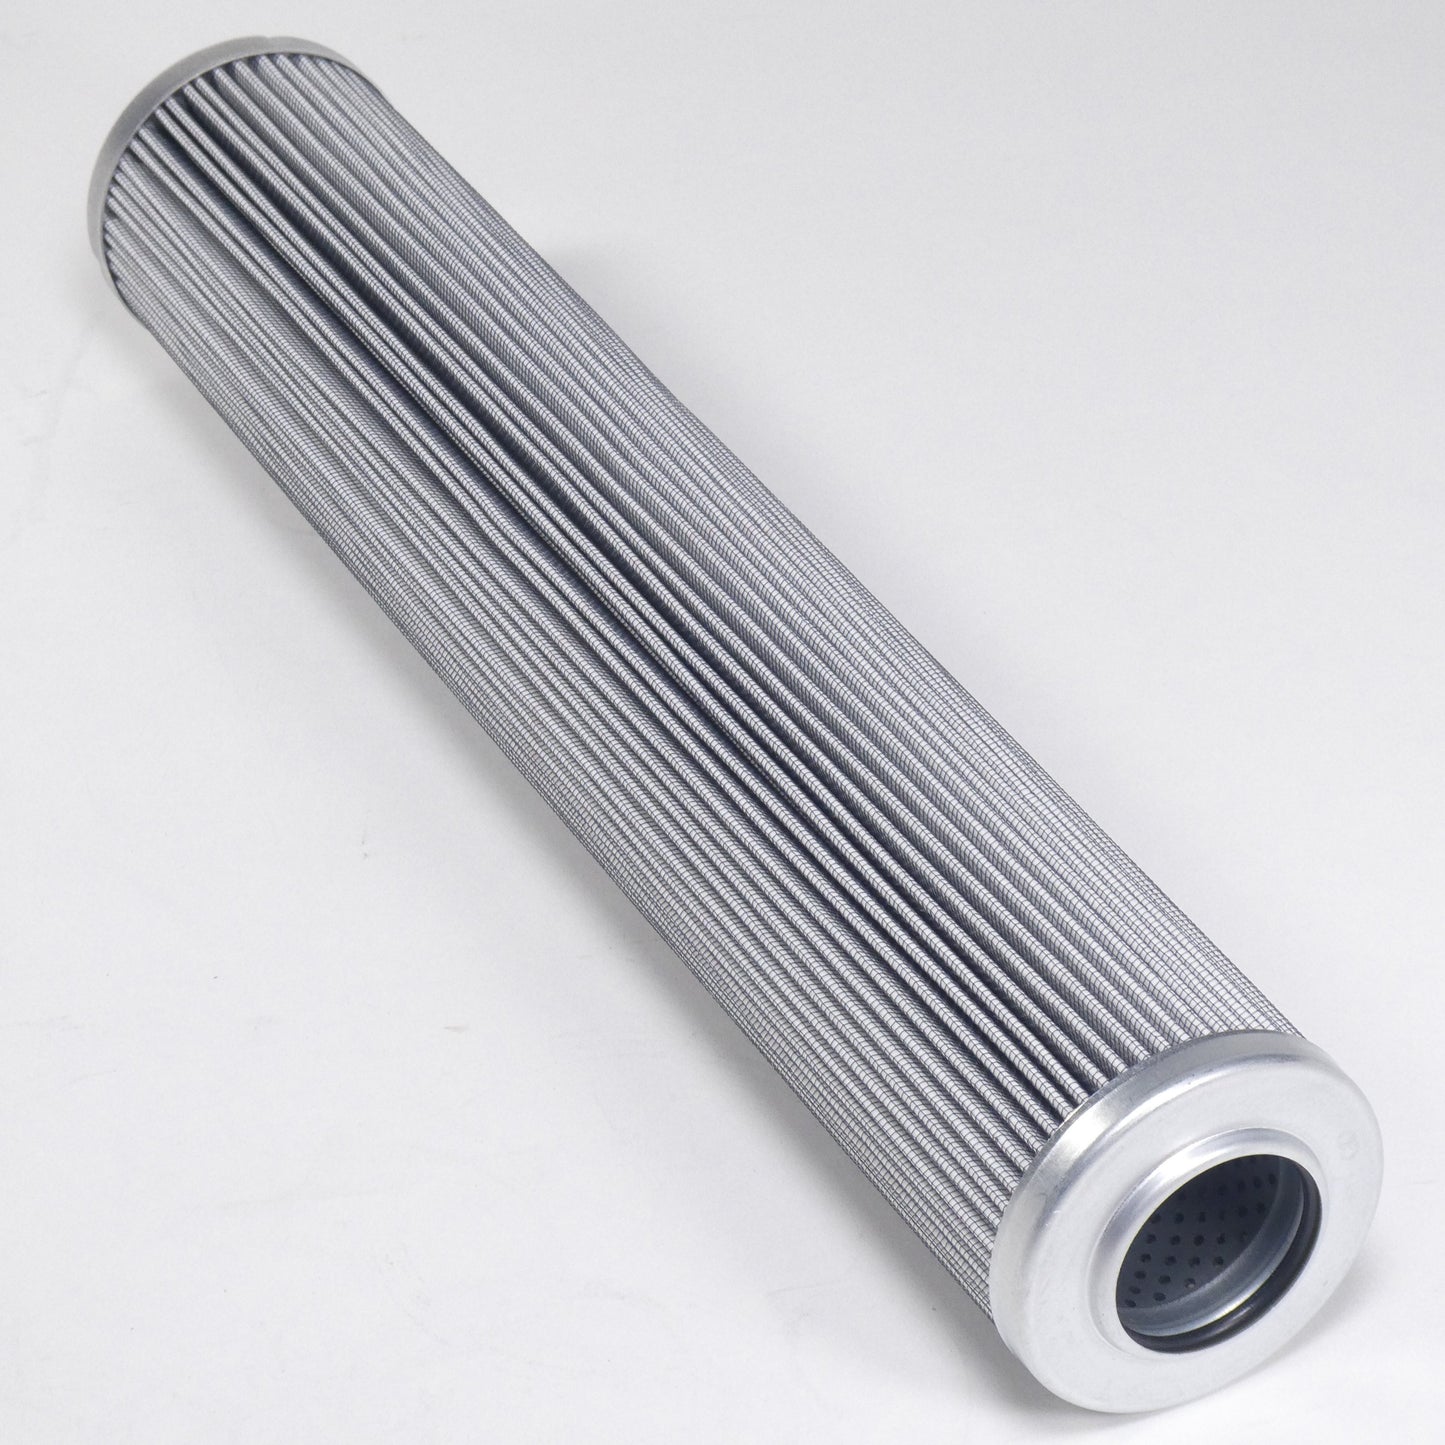 Hydrafil Replacement Filter Element for Hydac H9600/16-005BN4HC